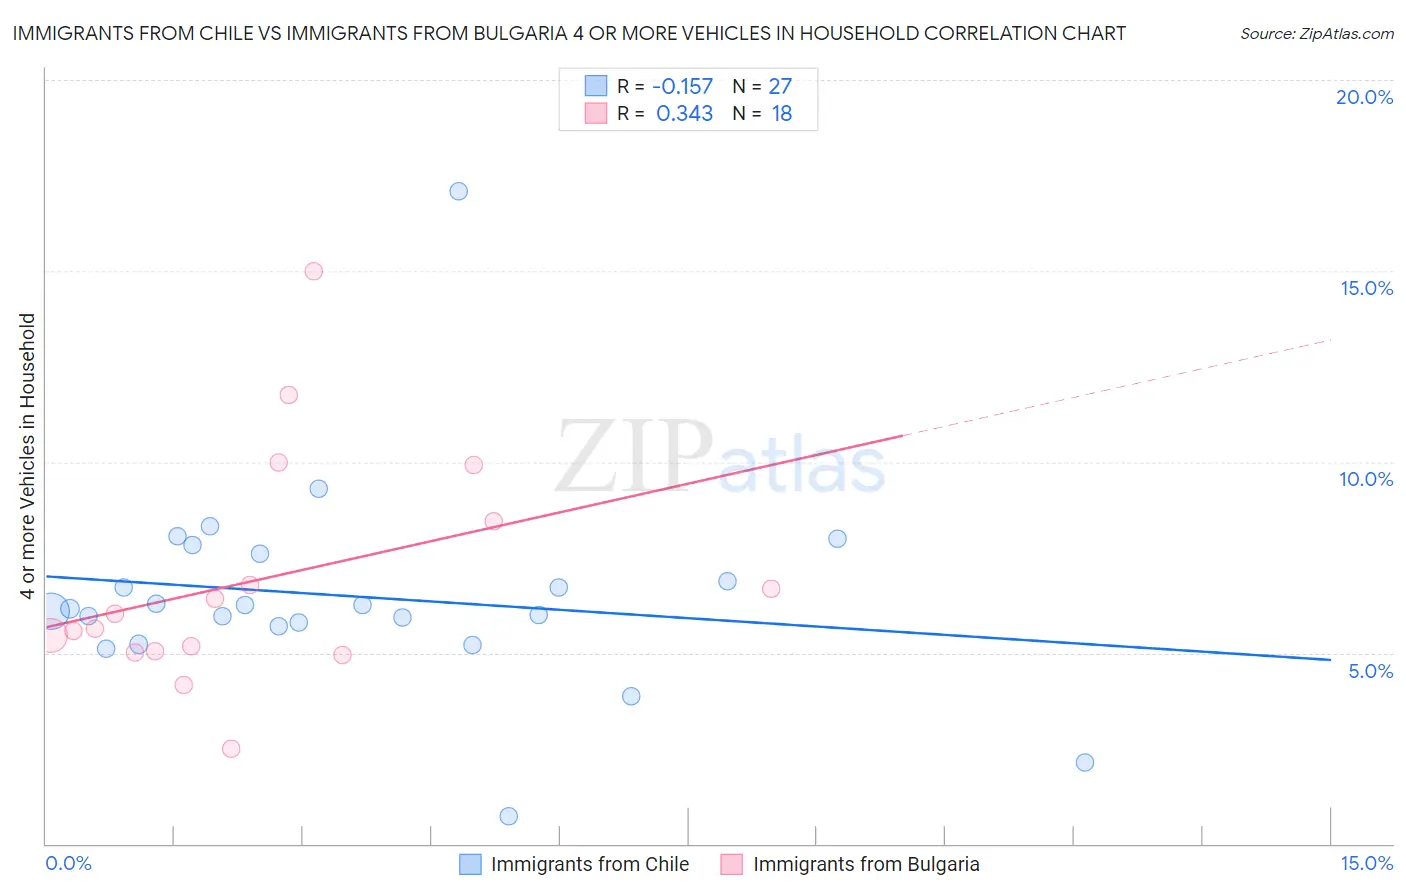 Immigrants from Chile vs Immigrants from Bulgaria 4 or more Vehicles in Household